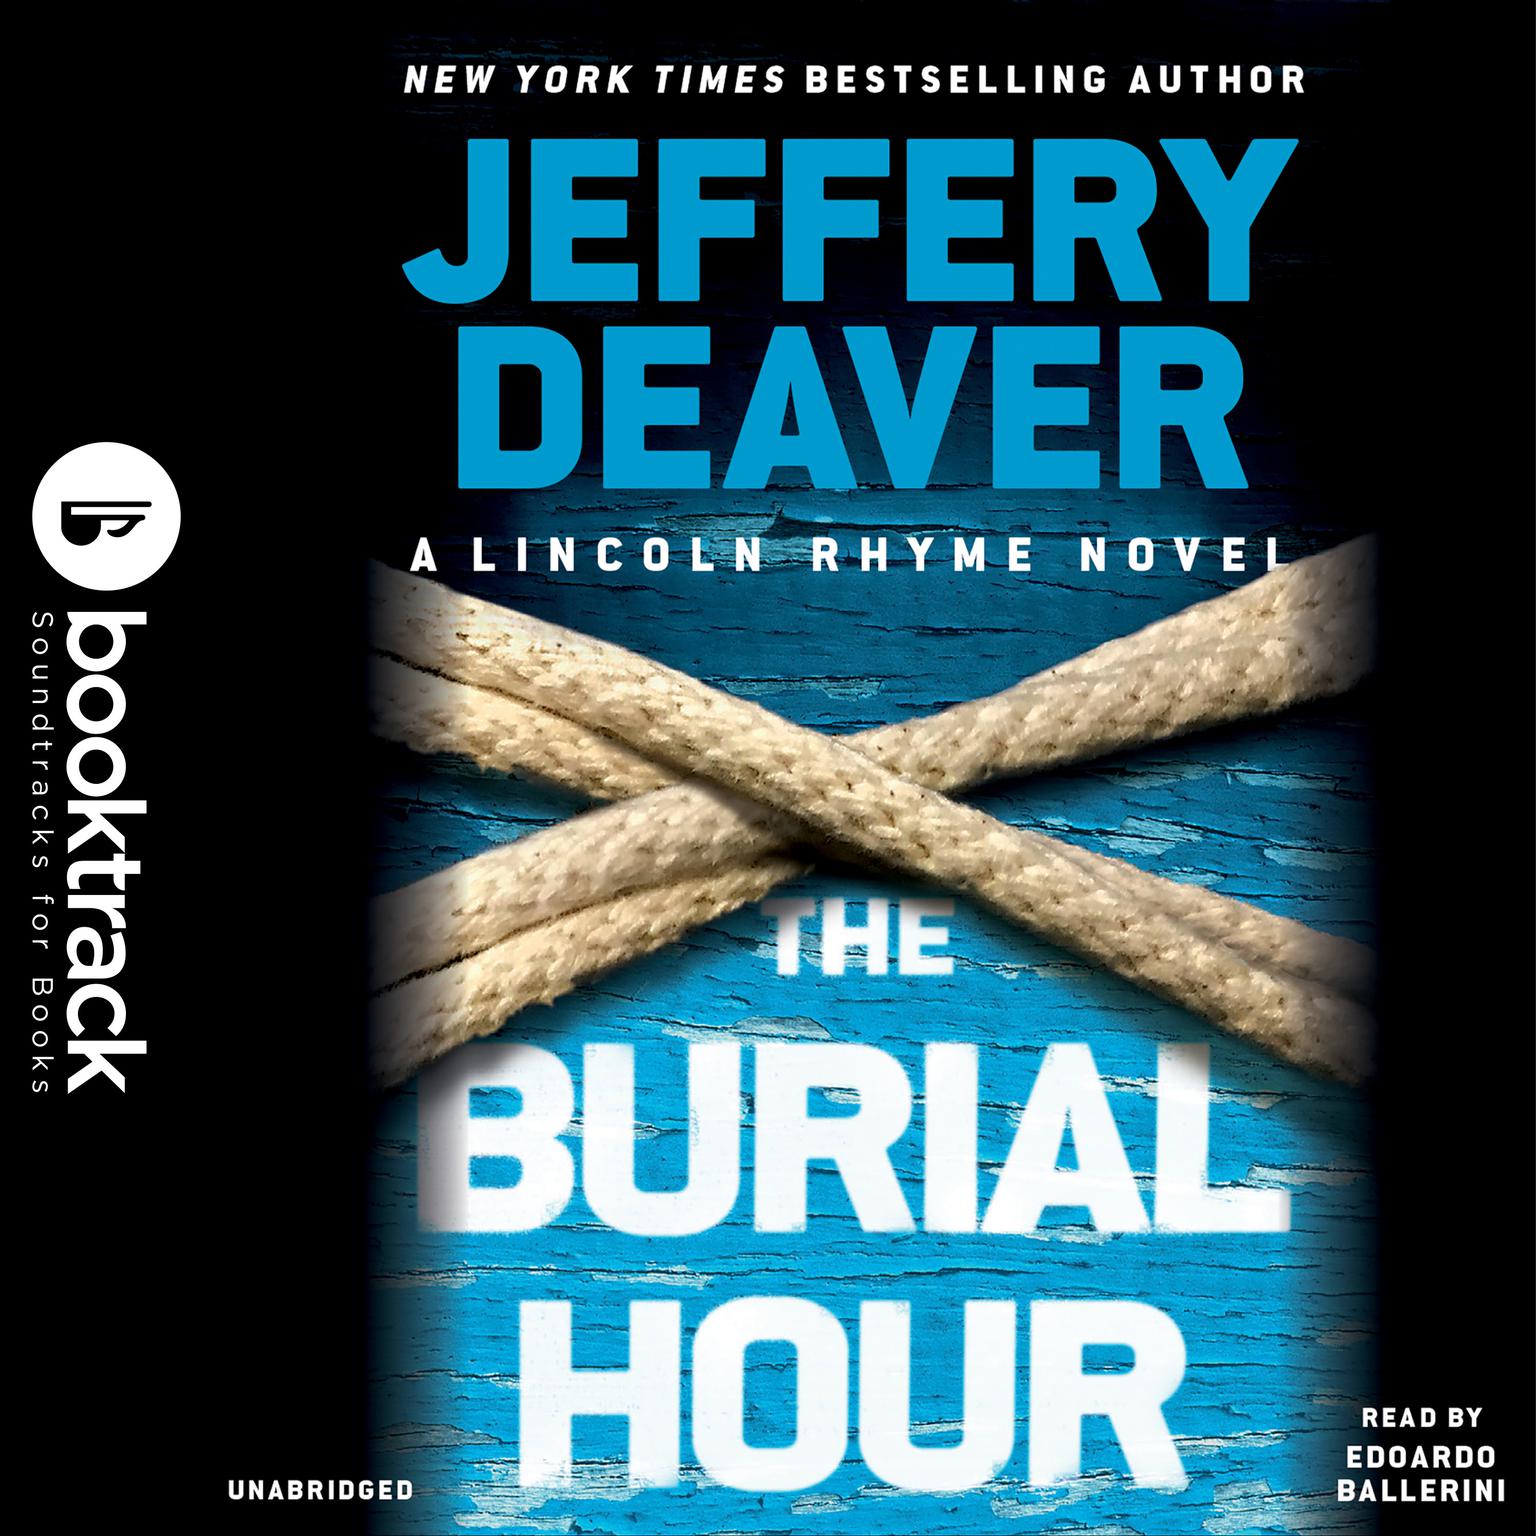 The Burial Hour: Booktrack Edition Audiobook, by Jeffery Deaver